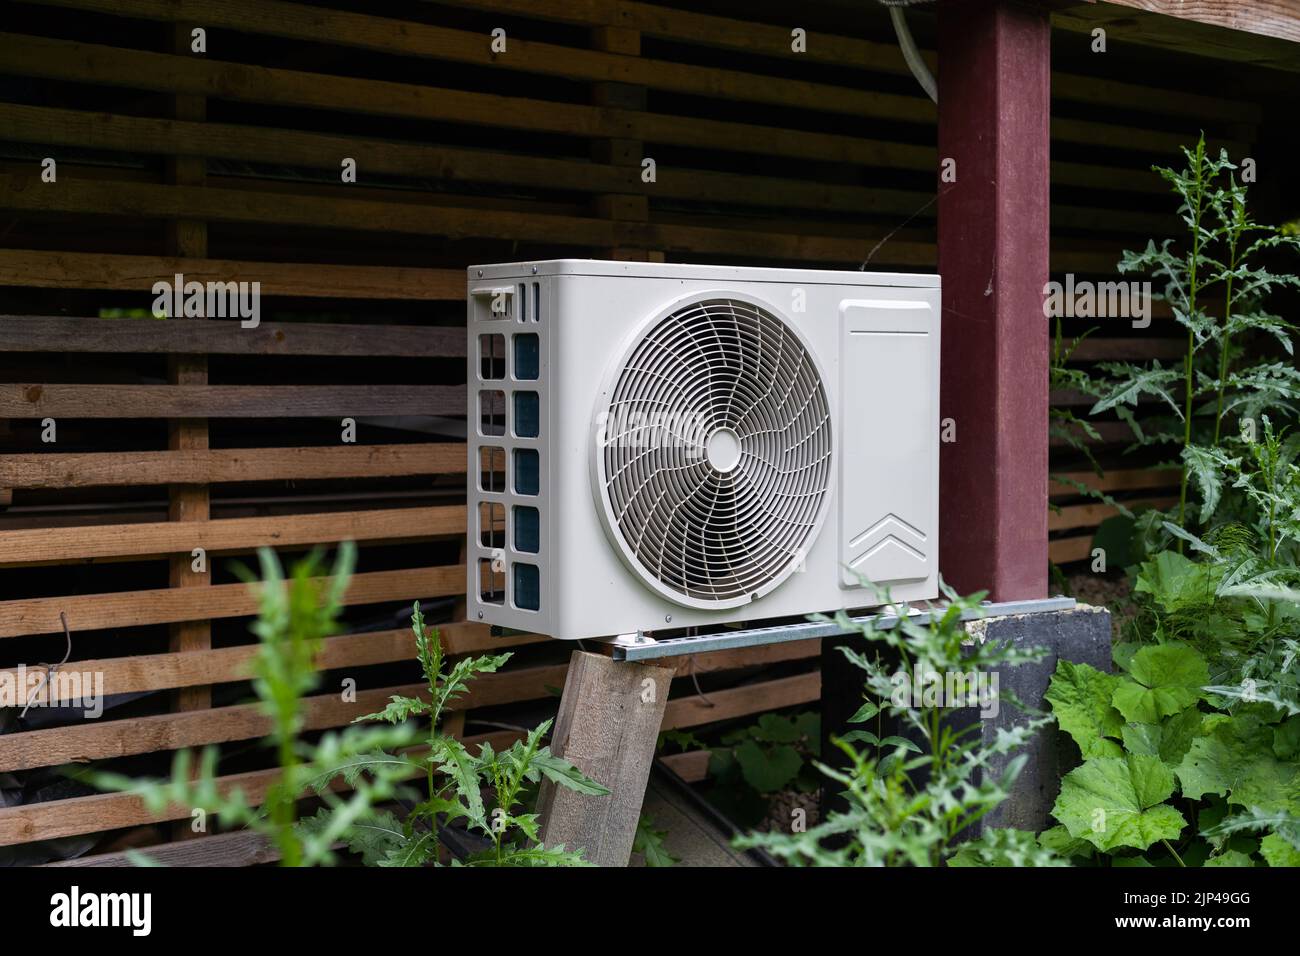 New modern HVAC air conditioning external compressor unit preapred for installation or wall of wooden residential country cottage Stock Photo - Alamy